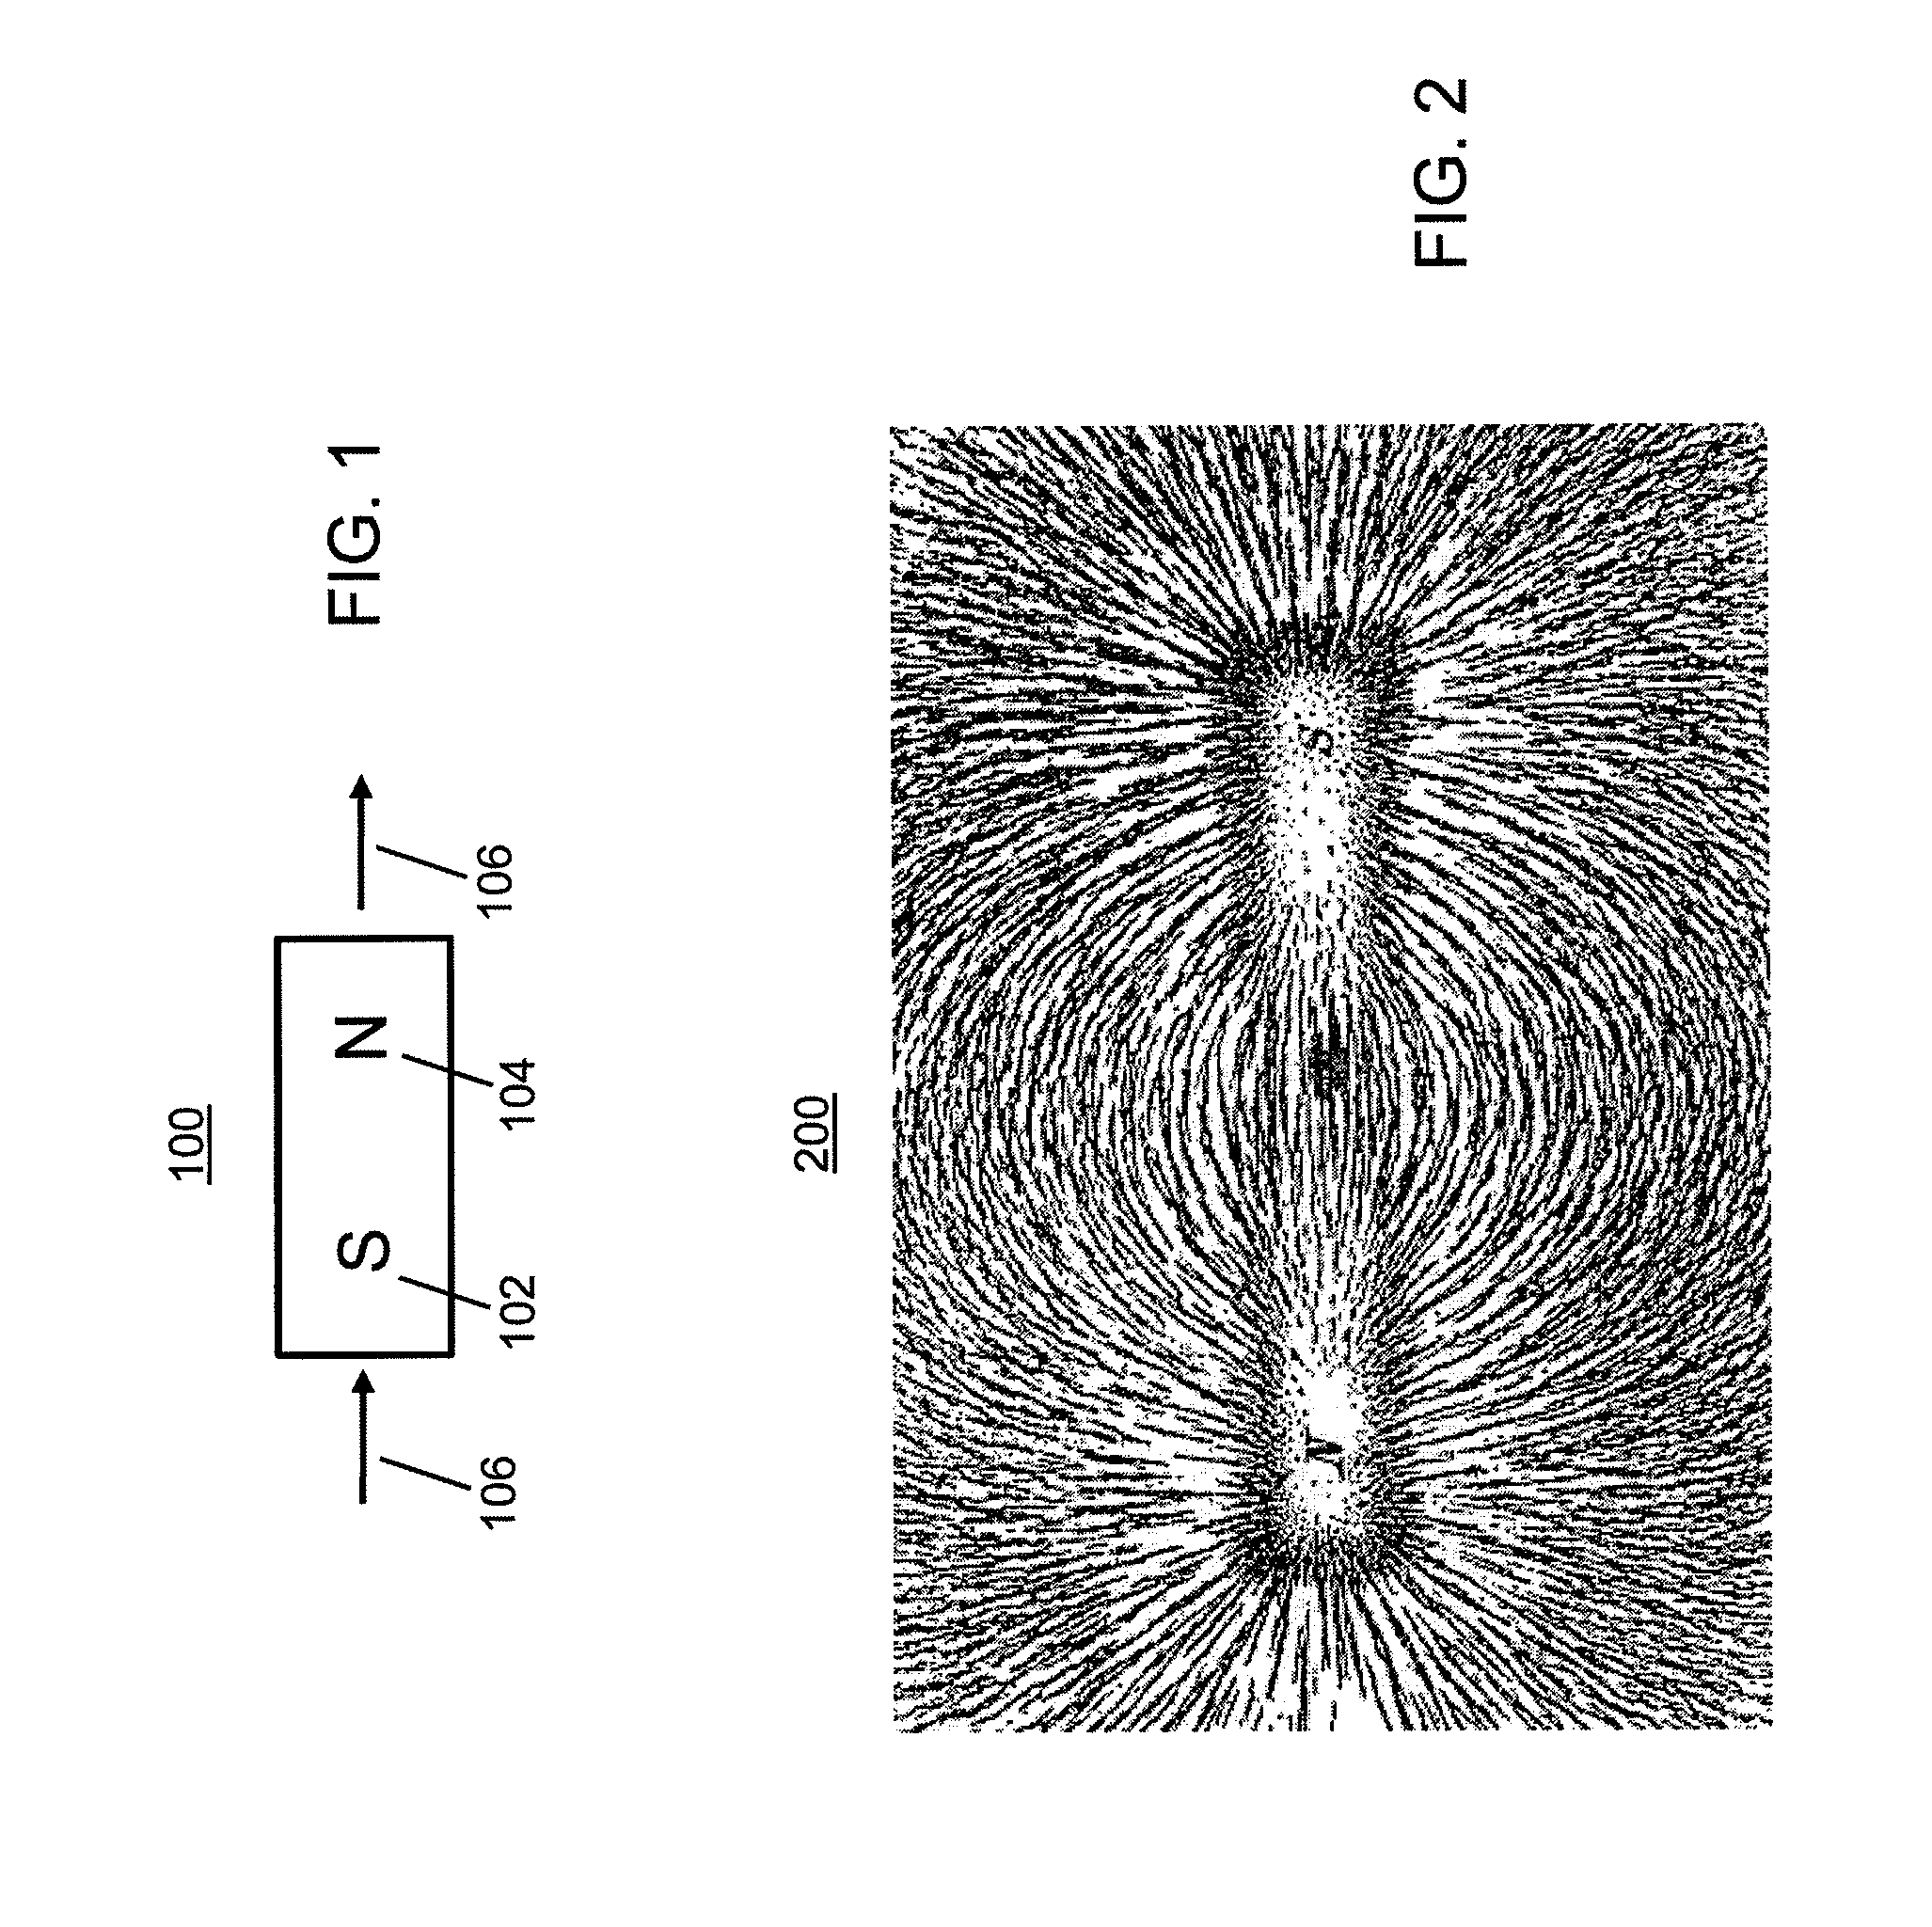 System and method for producing a spatial force